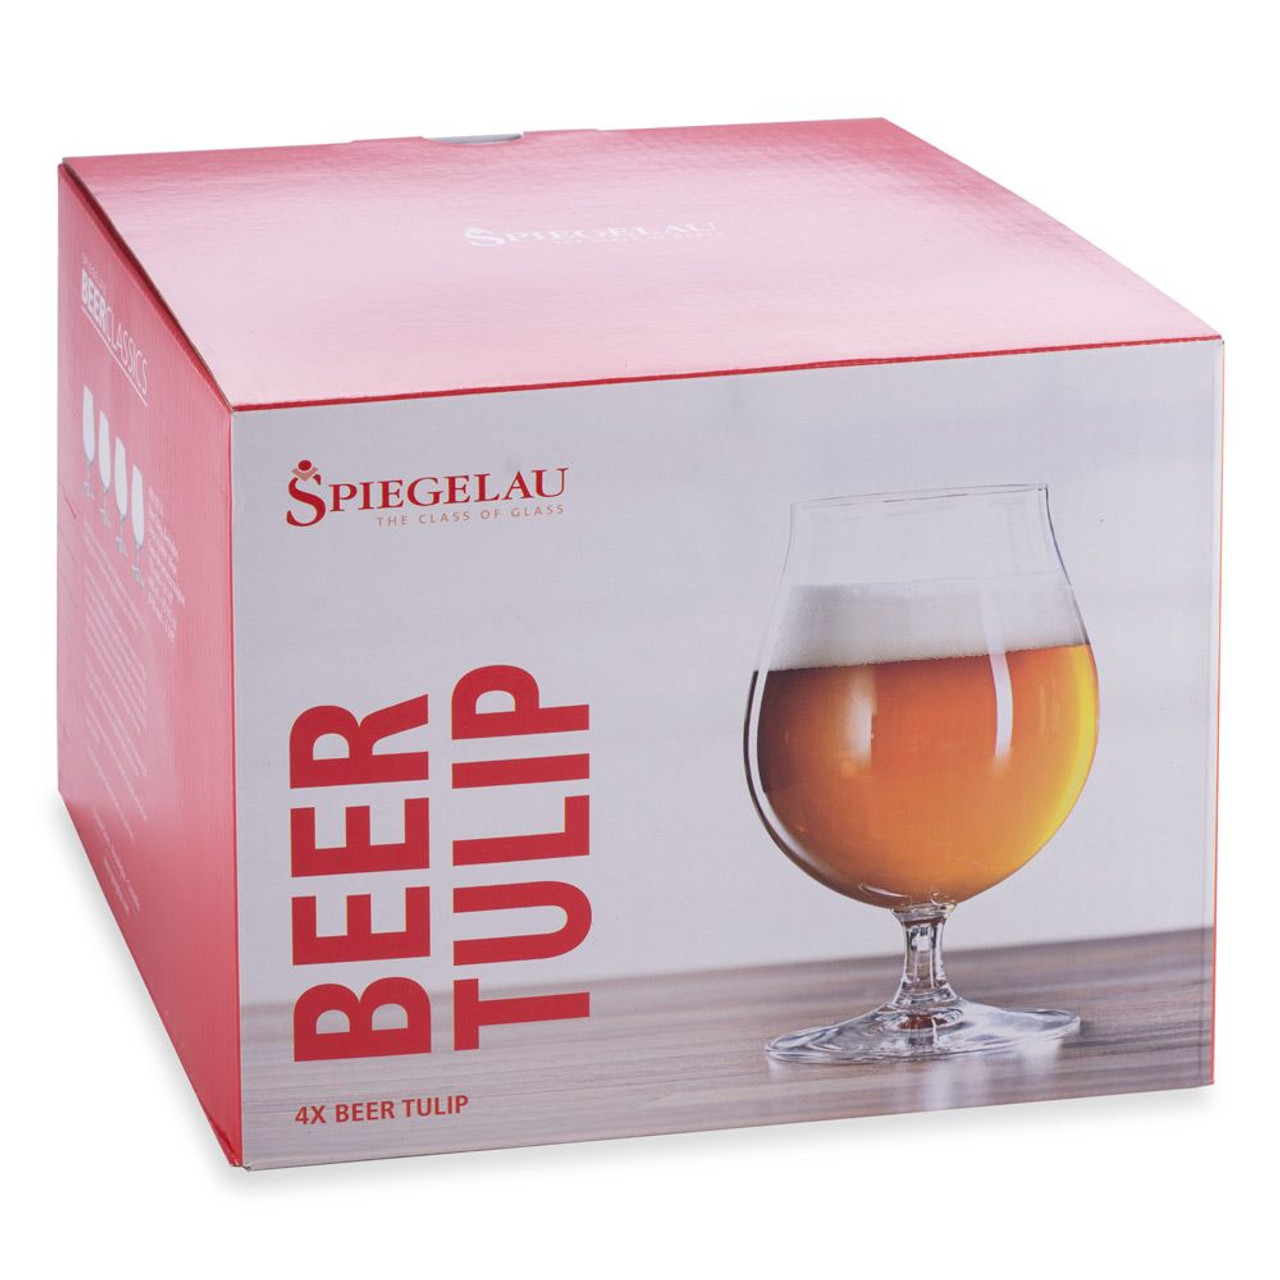 https://cdn11.bigcommerce.com/s-cznxq08r7/images/stencil/1280x1280/products/802/1698/4991974_spiegelau-crystal-tulip-beer-glasses-set-of-4_12_1__71624.1590765256.jpg?c=1